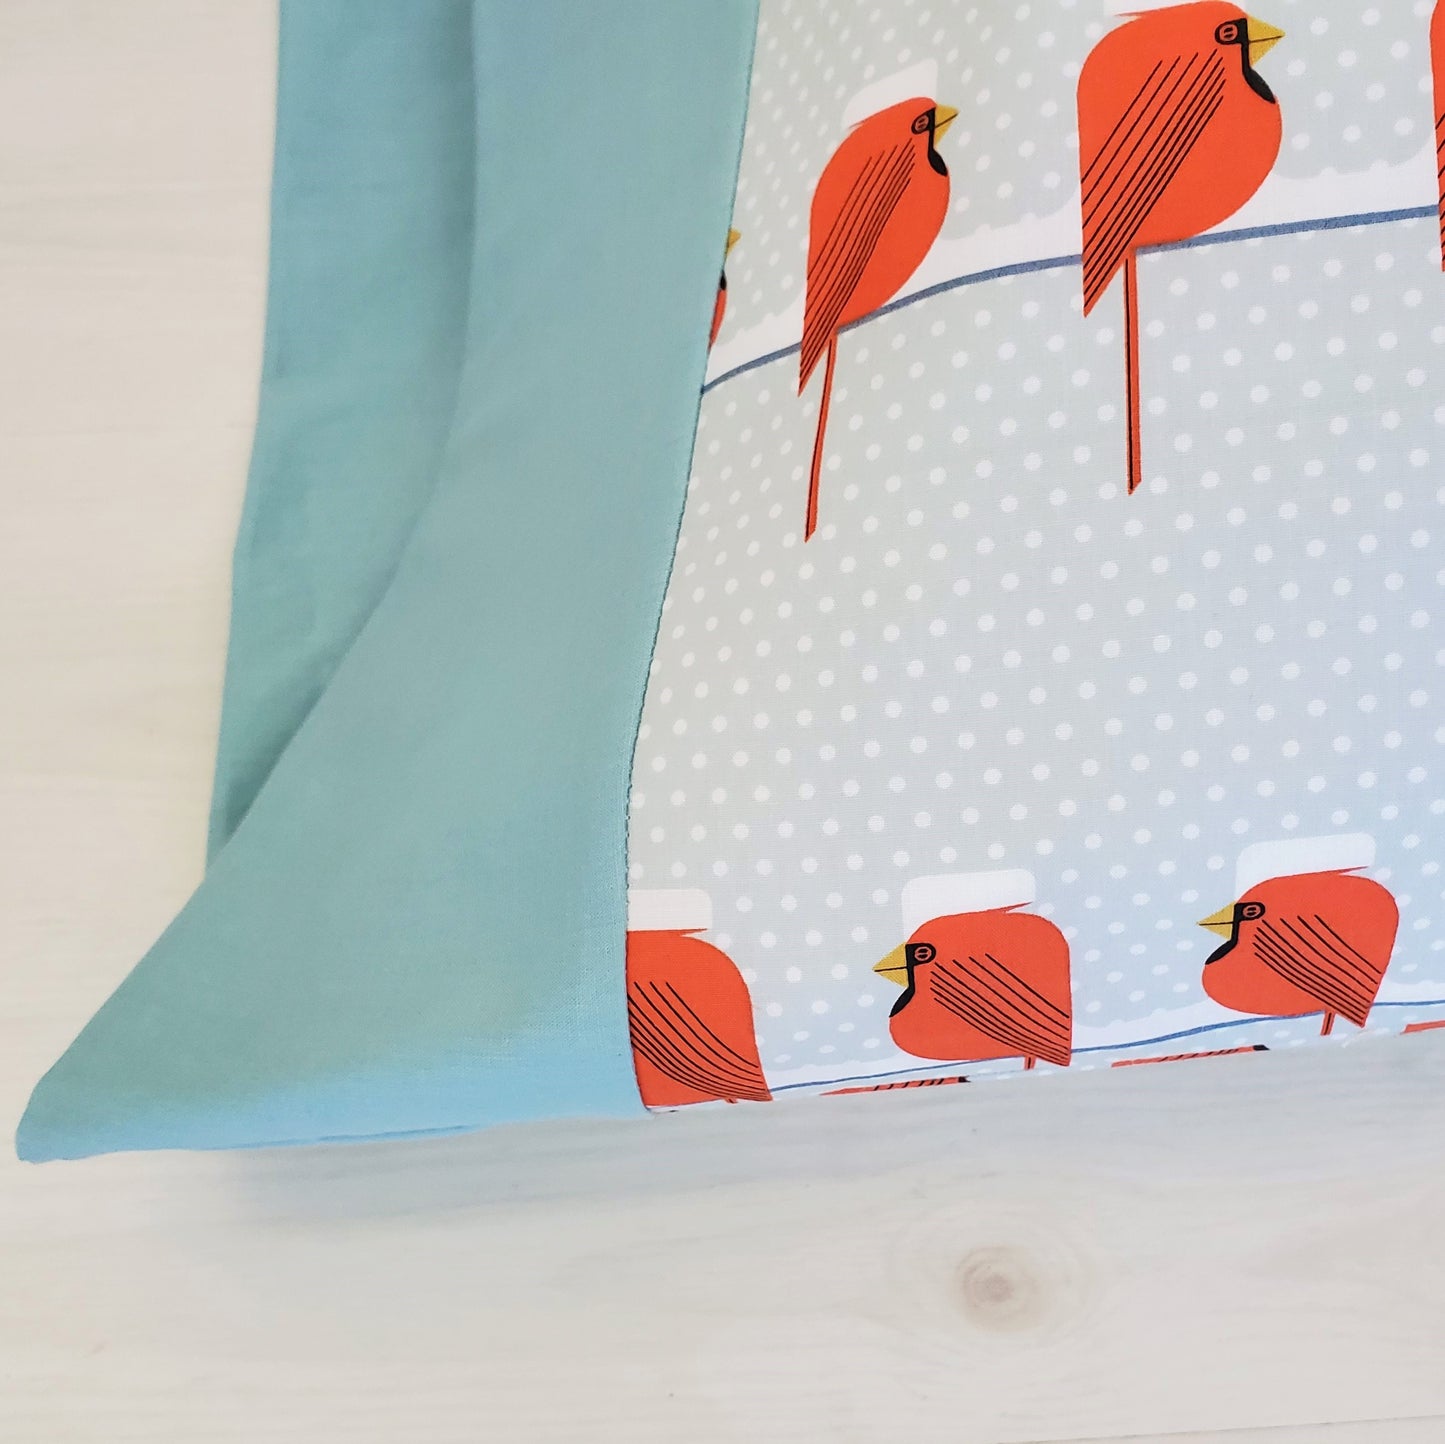 Charley Harper Holiday Pillowcases in Assorted Organic Cotton Prints